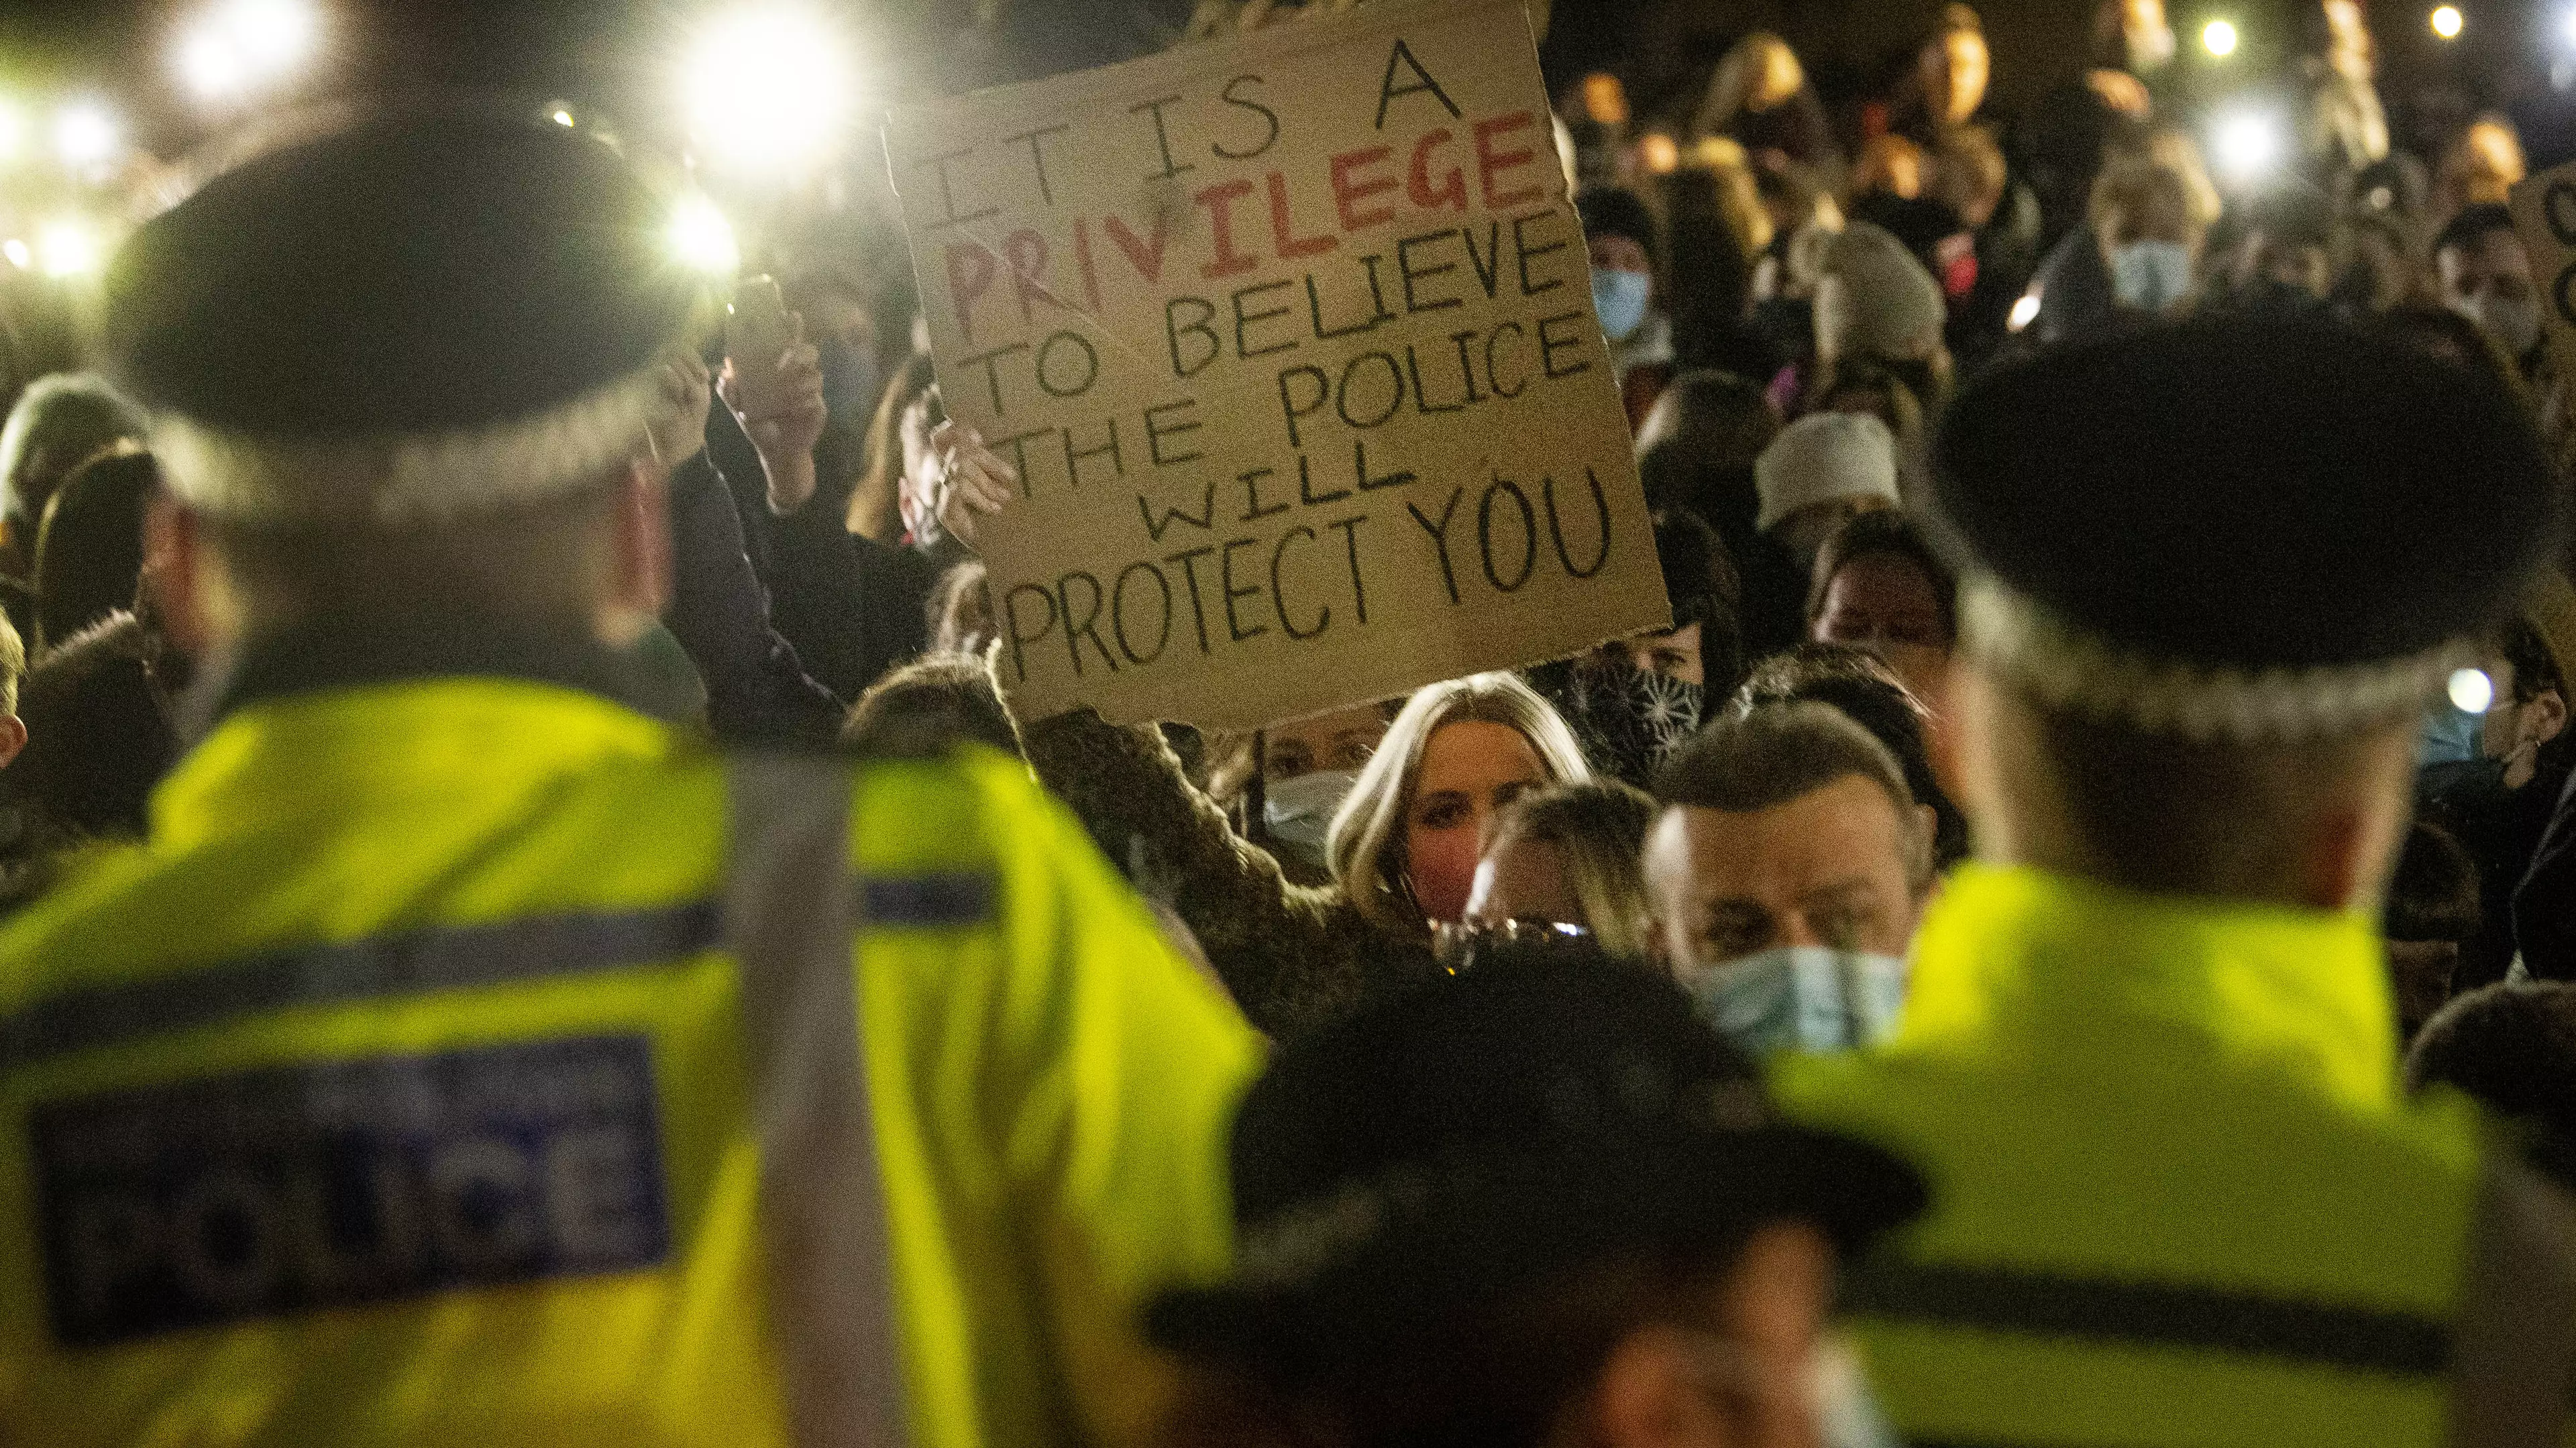 Police Slammed For Response To Football Win Crowd Versus Silent Vigil For Sarah Everard